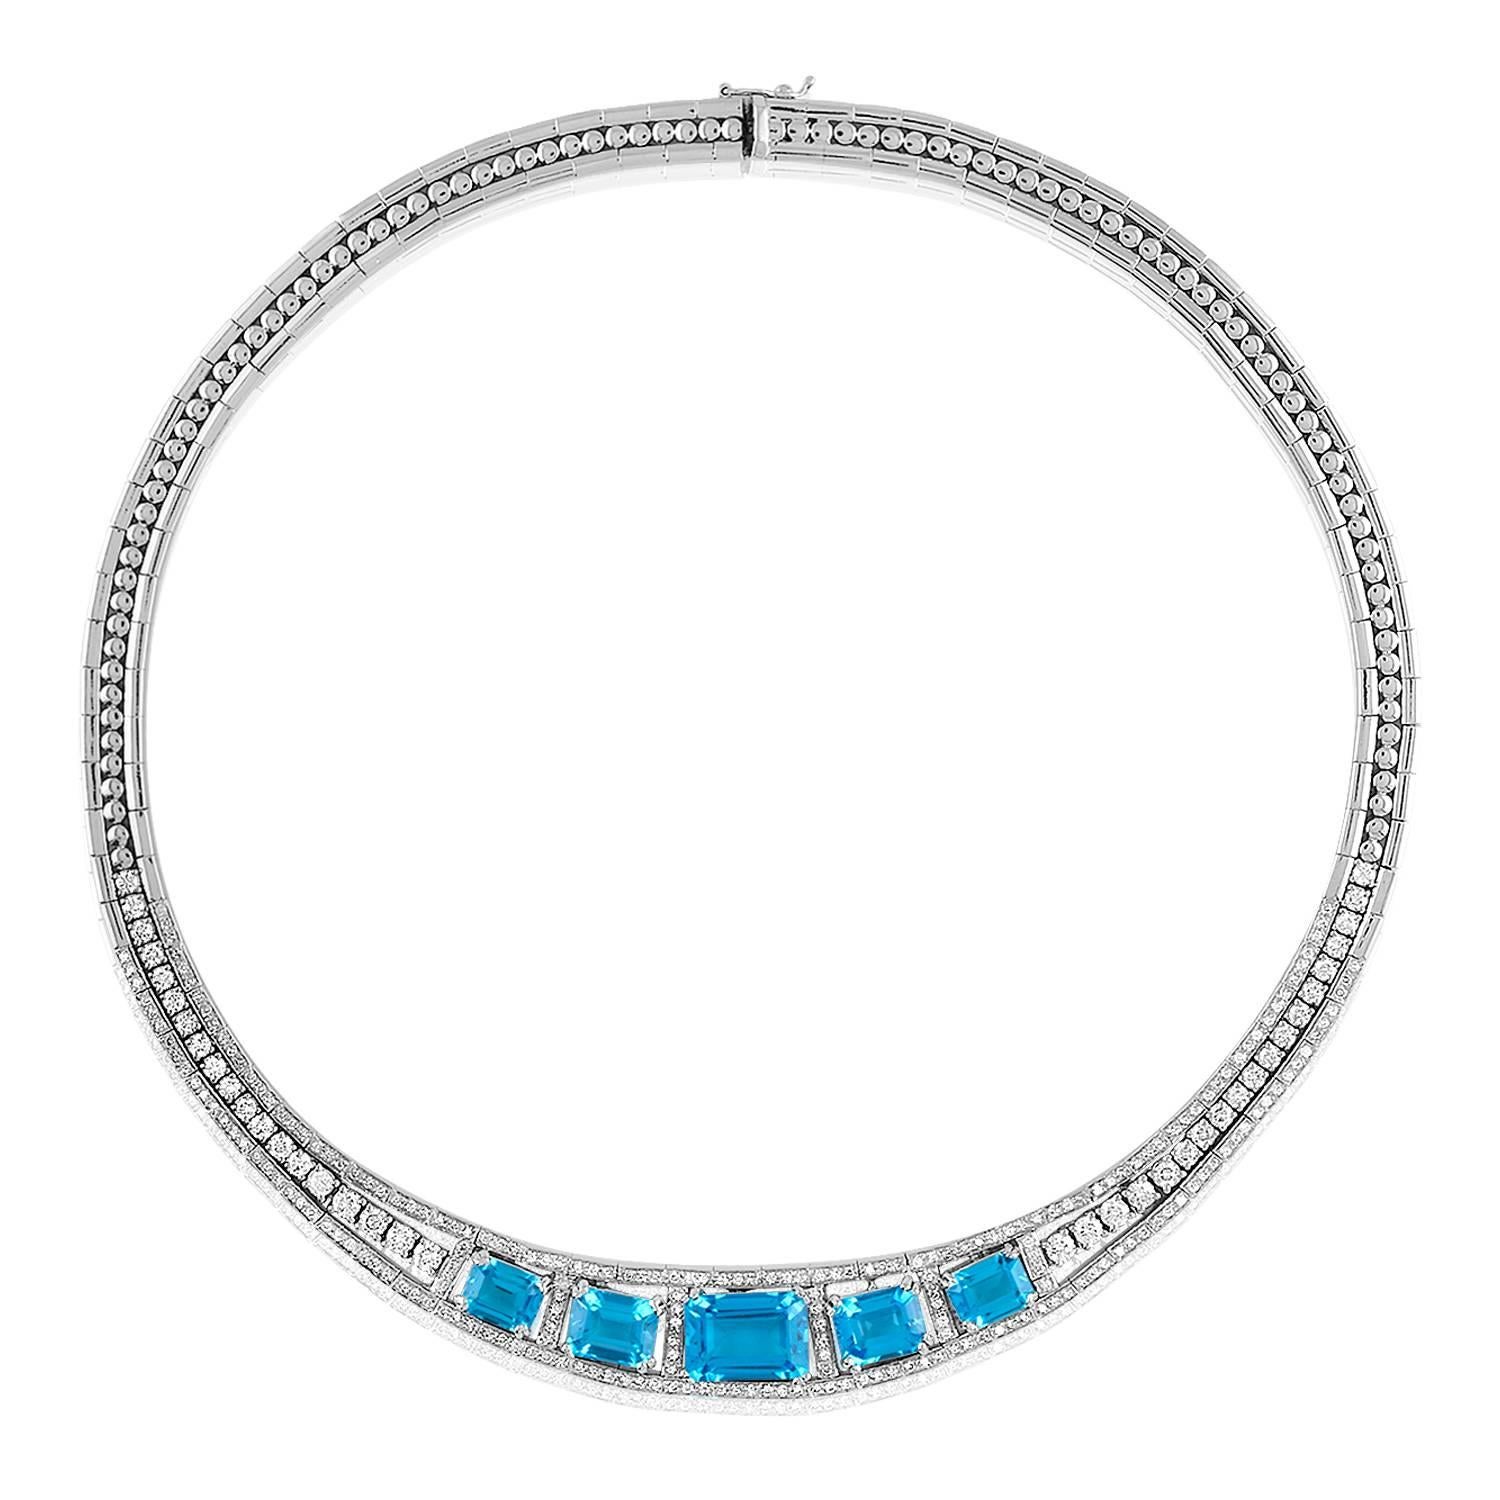 Stunning 3-Piece Set
The set consists of 1 Bracelet, 1 Necklace, & 1 Pair of Earrings

The necklace is 18K White Gold
There are 5.32 Carats in Diamonds G SI
There are 24.67 Carats in Blue Topaz
The necklace is 16